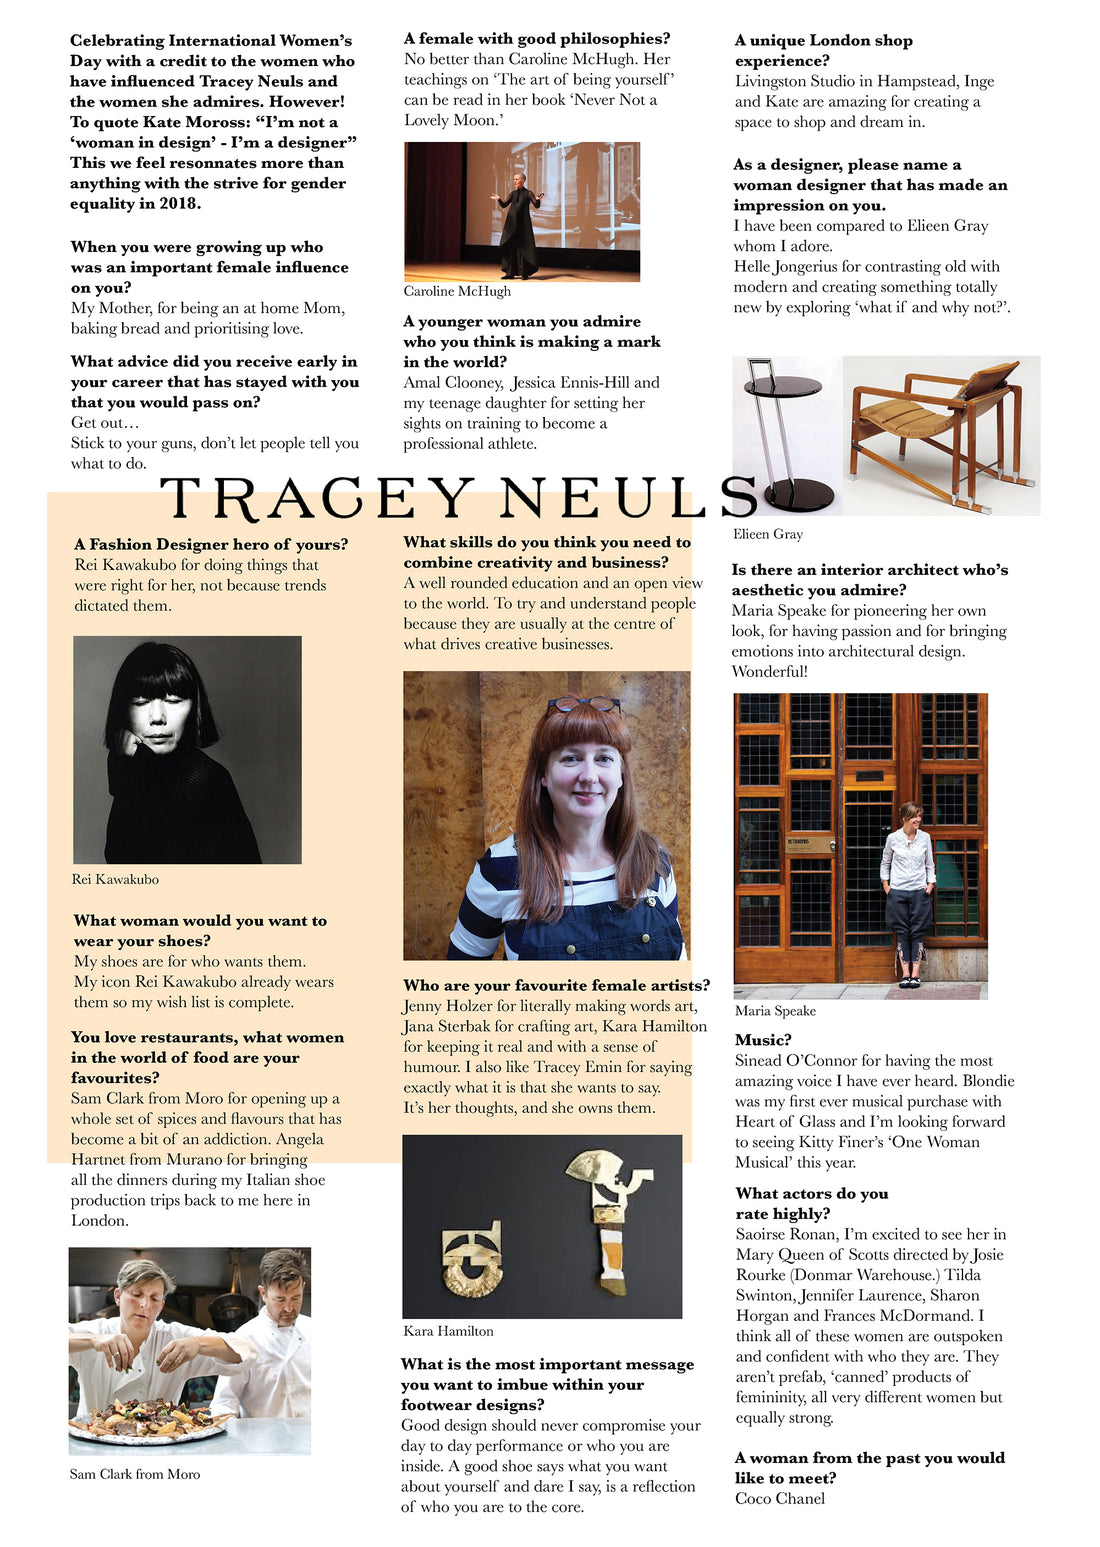 Interview with designer for International Women's Day Tracey Neuls